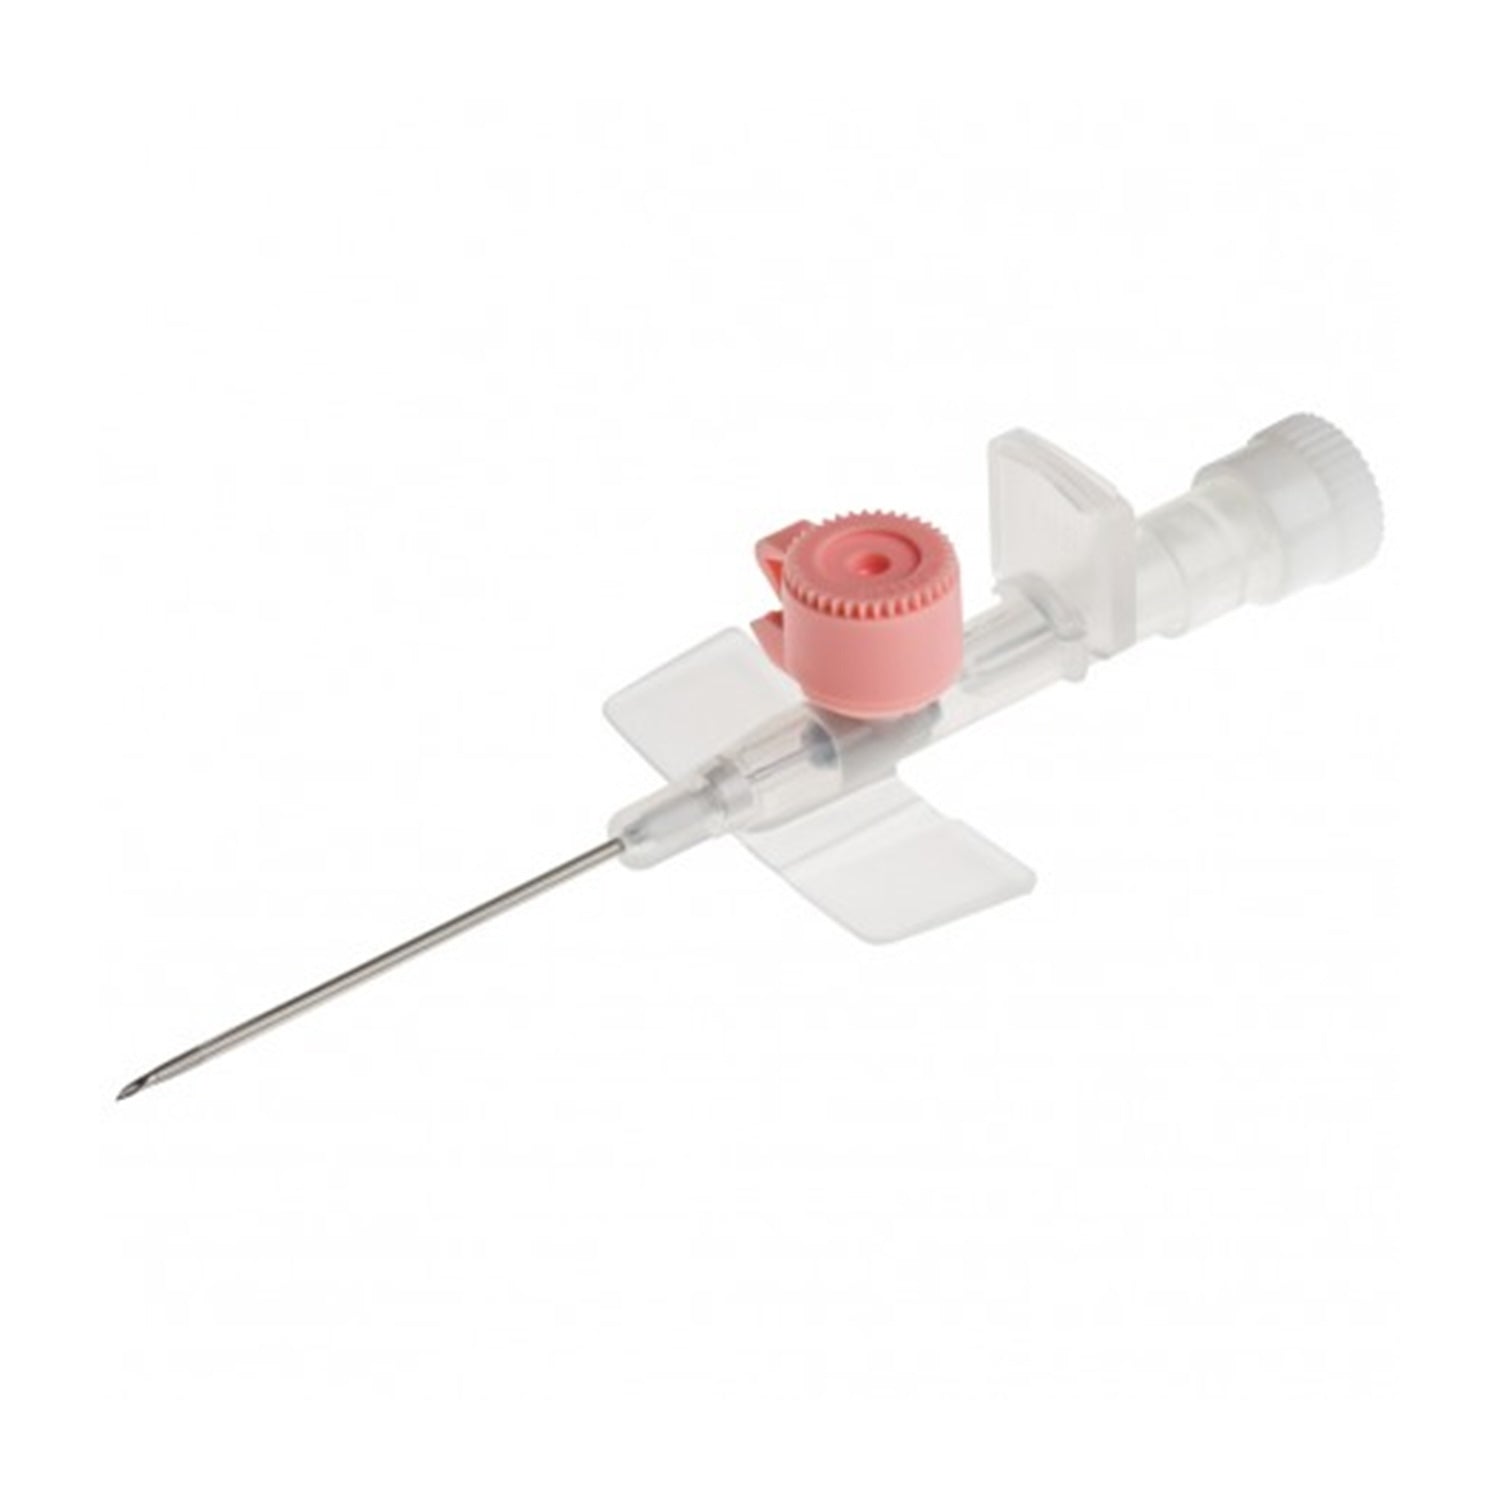 BD Venflon Pro Peripheral IV Cannula with Injection Port | Pink x 20G x 32 x 1mm | Pack of 50